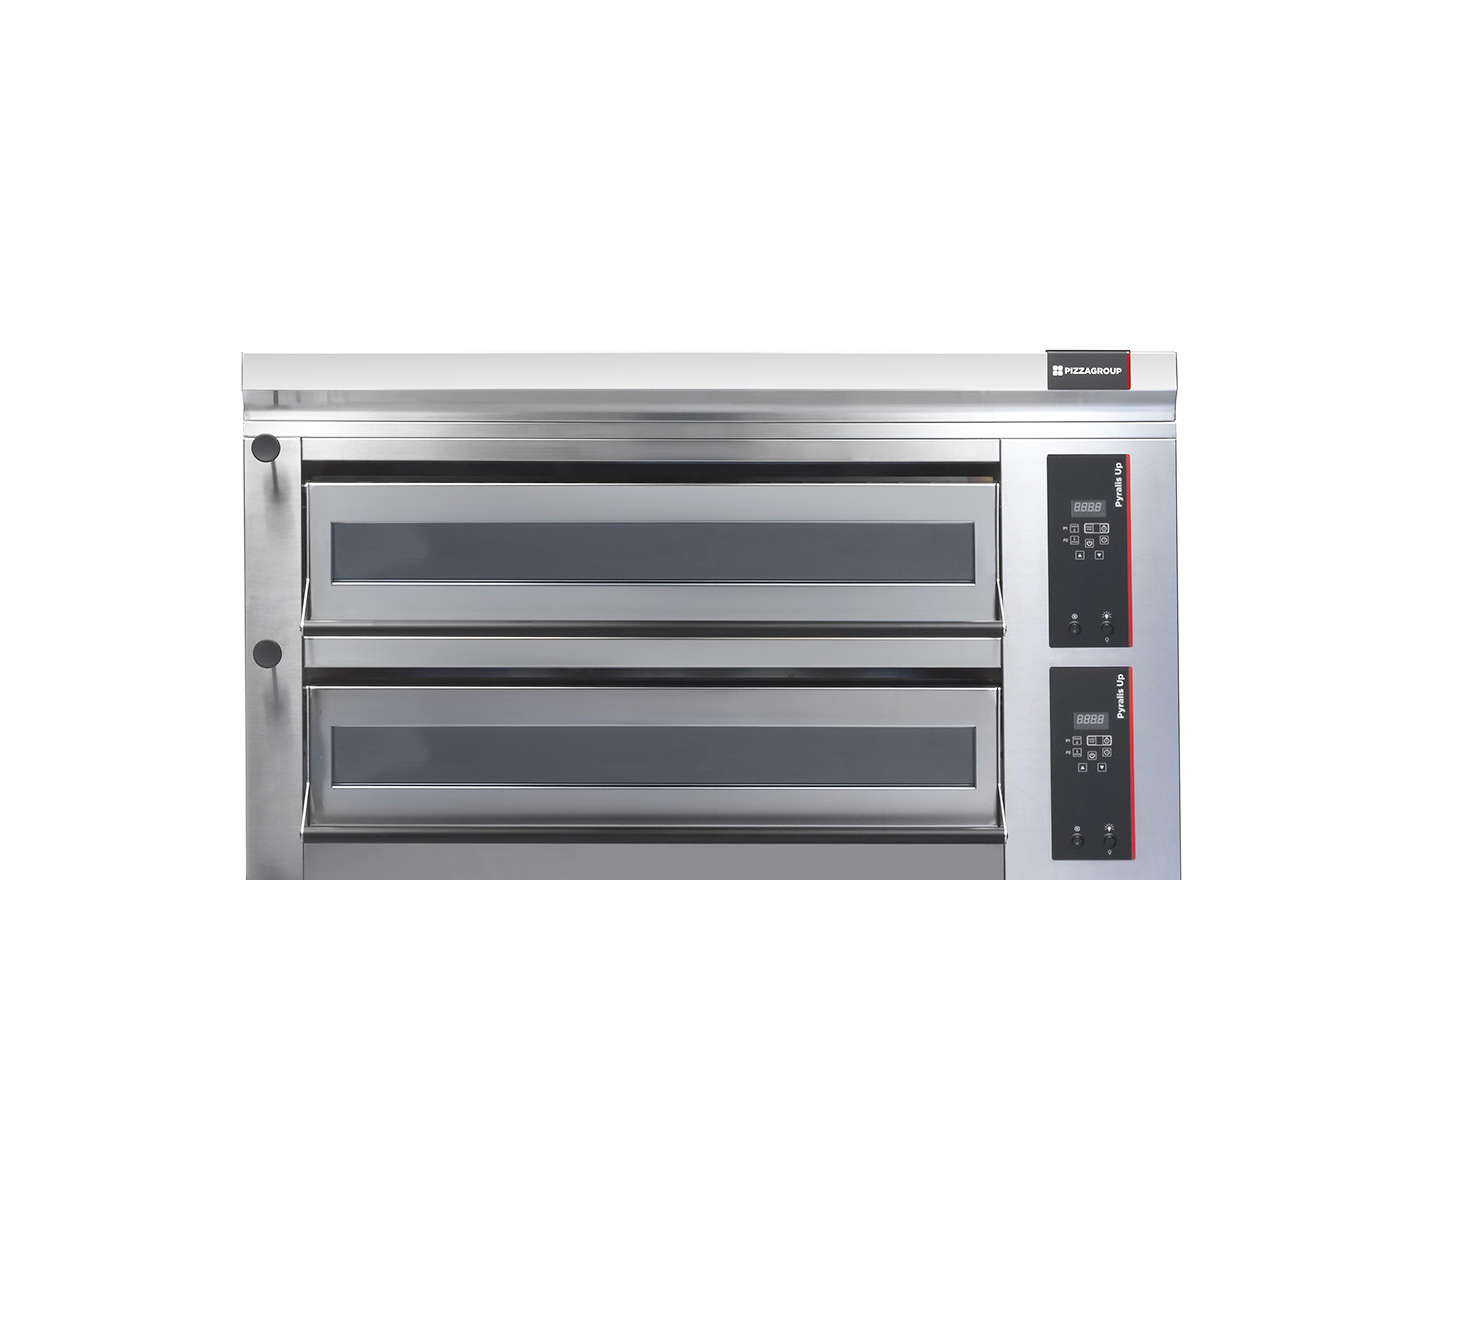 PIZZAGROUP Pyralis Up PY-UP M12 Double Deck Electric Pizza Oven